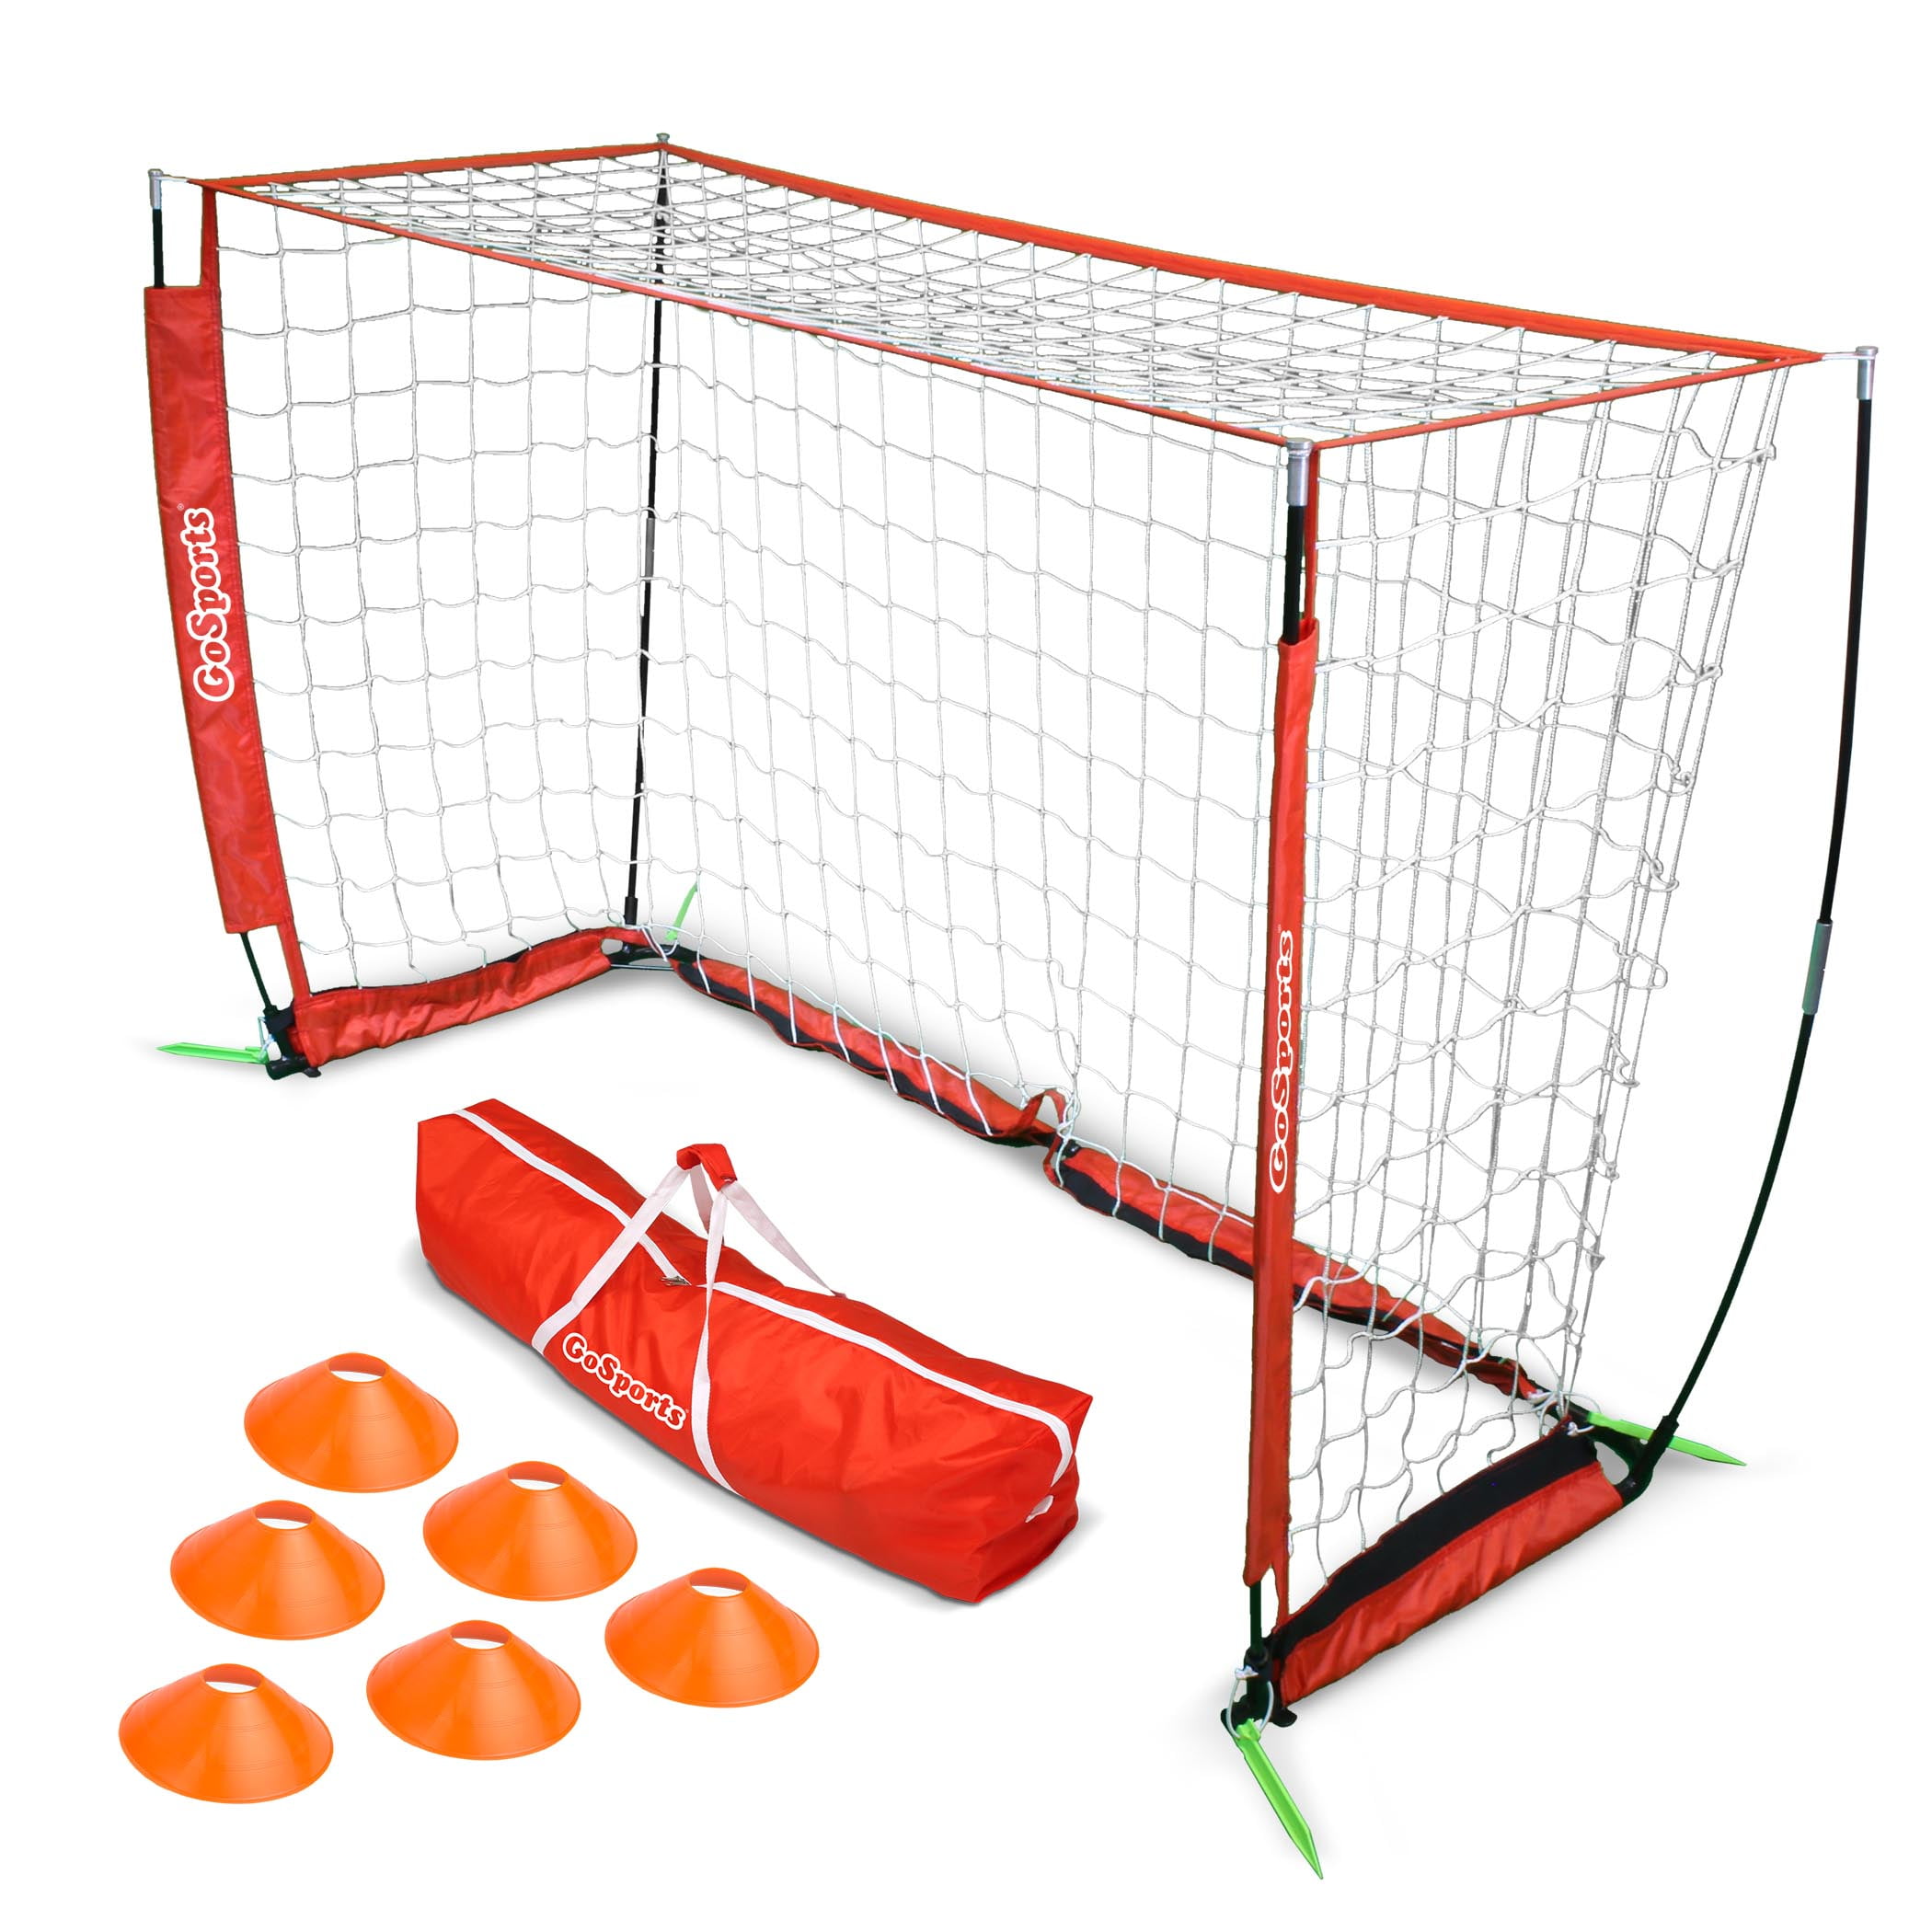 Athletic Works Large Portable Soccer Goal 10 ft X 6 ft New in Box 